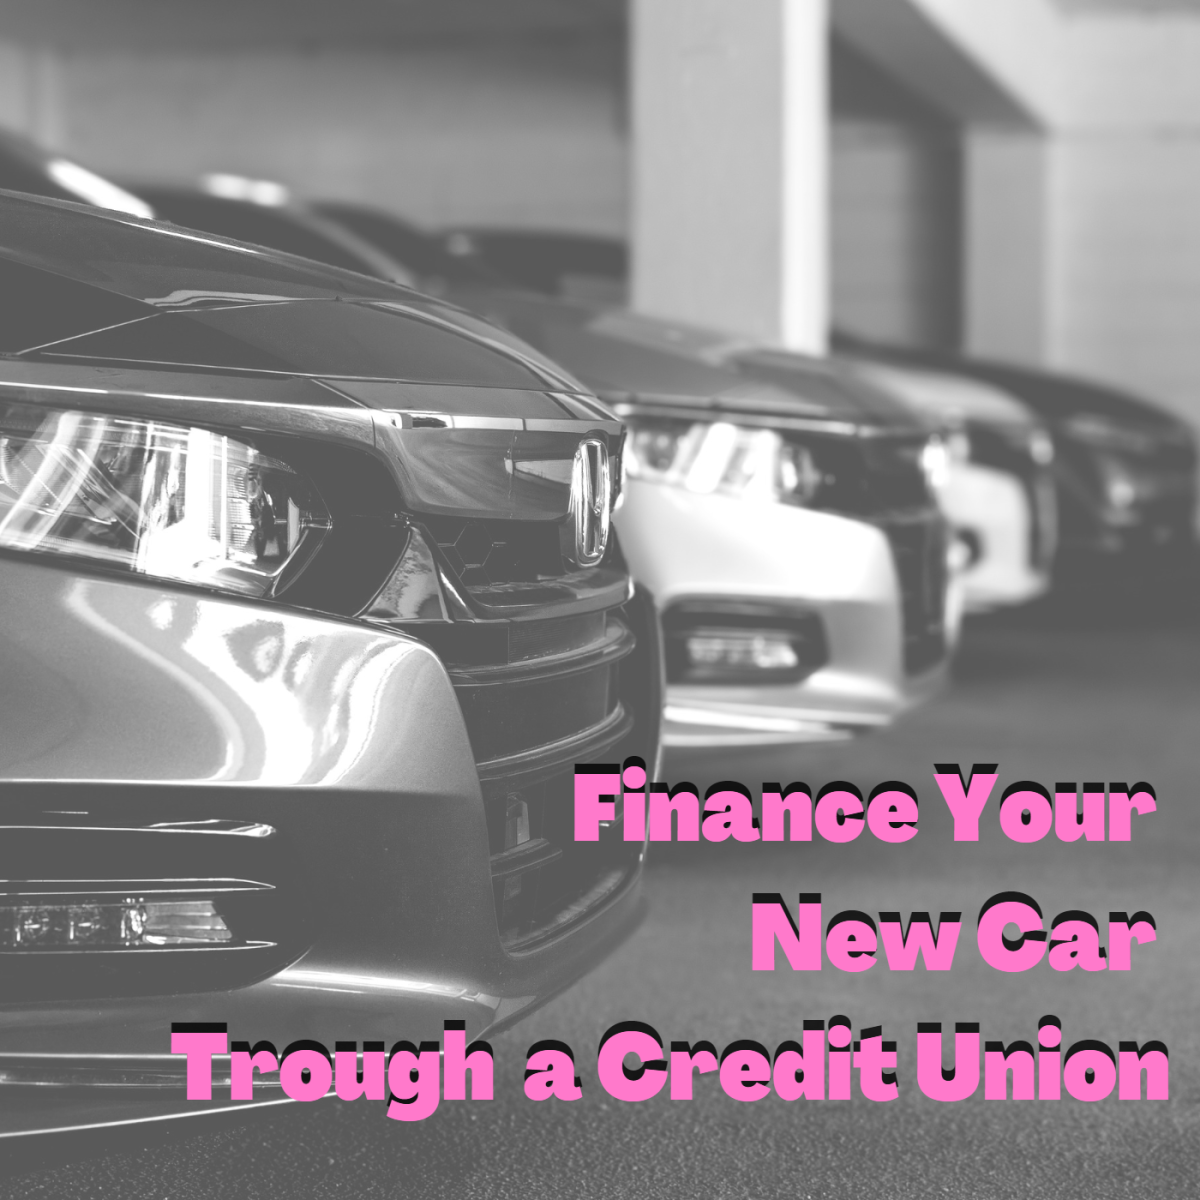 using-a-credit-union-to-finance-your-next-car-purchase